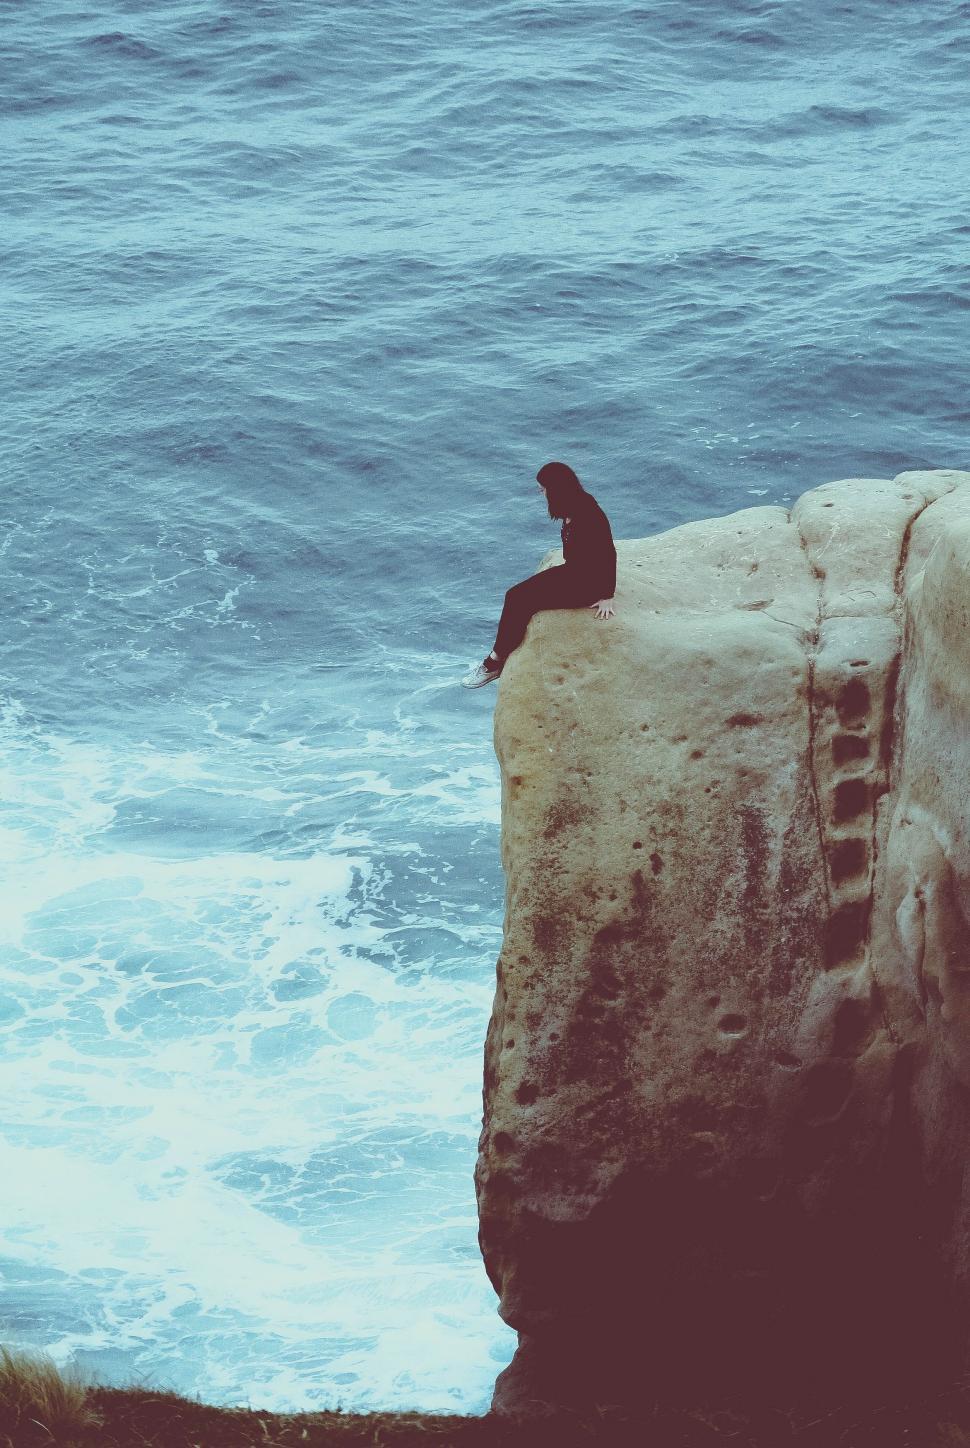 Free Image of Person Sitting on Rock by Ocean 